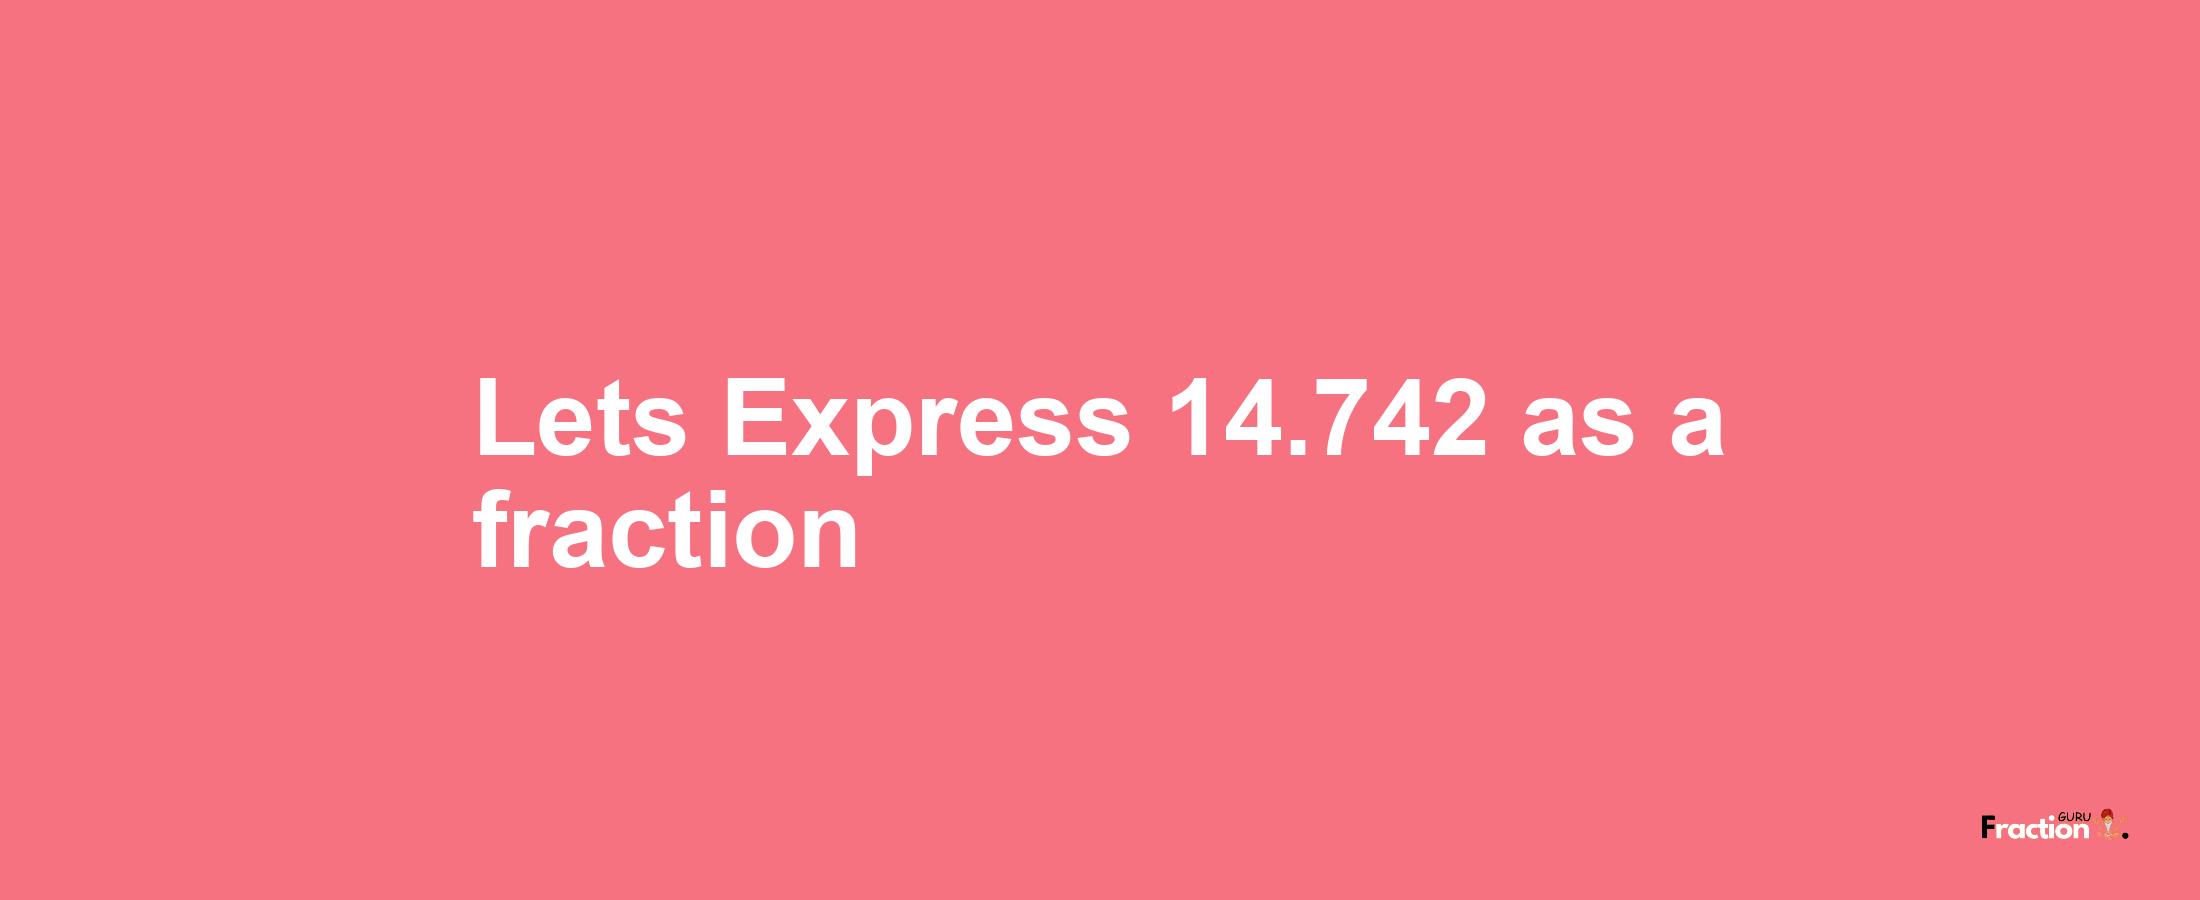 Lets Express 14.742 as afraction